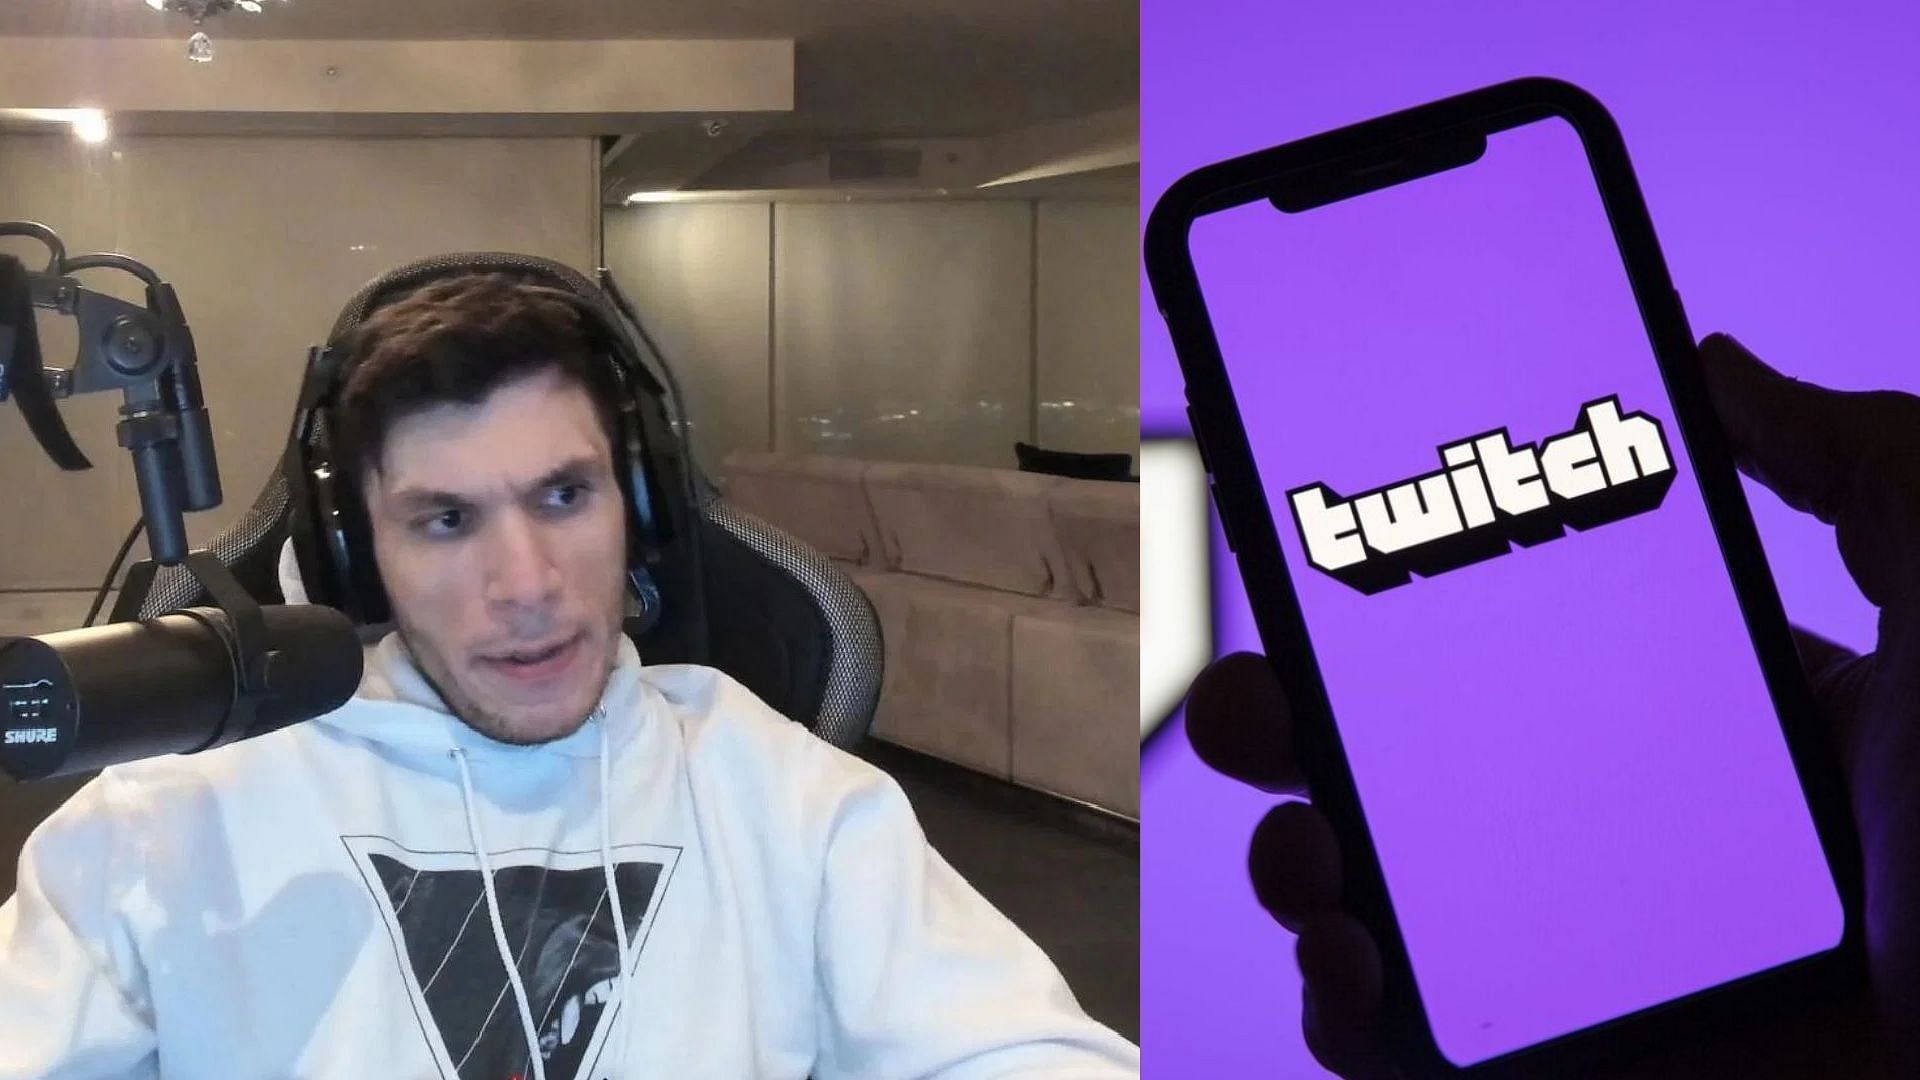 Trainwreckstv tweeting out trying to recruit some of Twitch's biggest  streamers and Speed to Kick : r/LivestreamFail